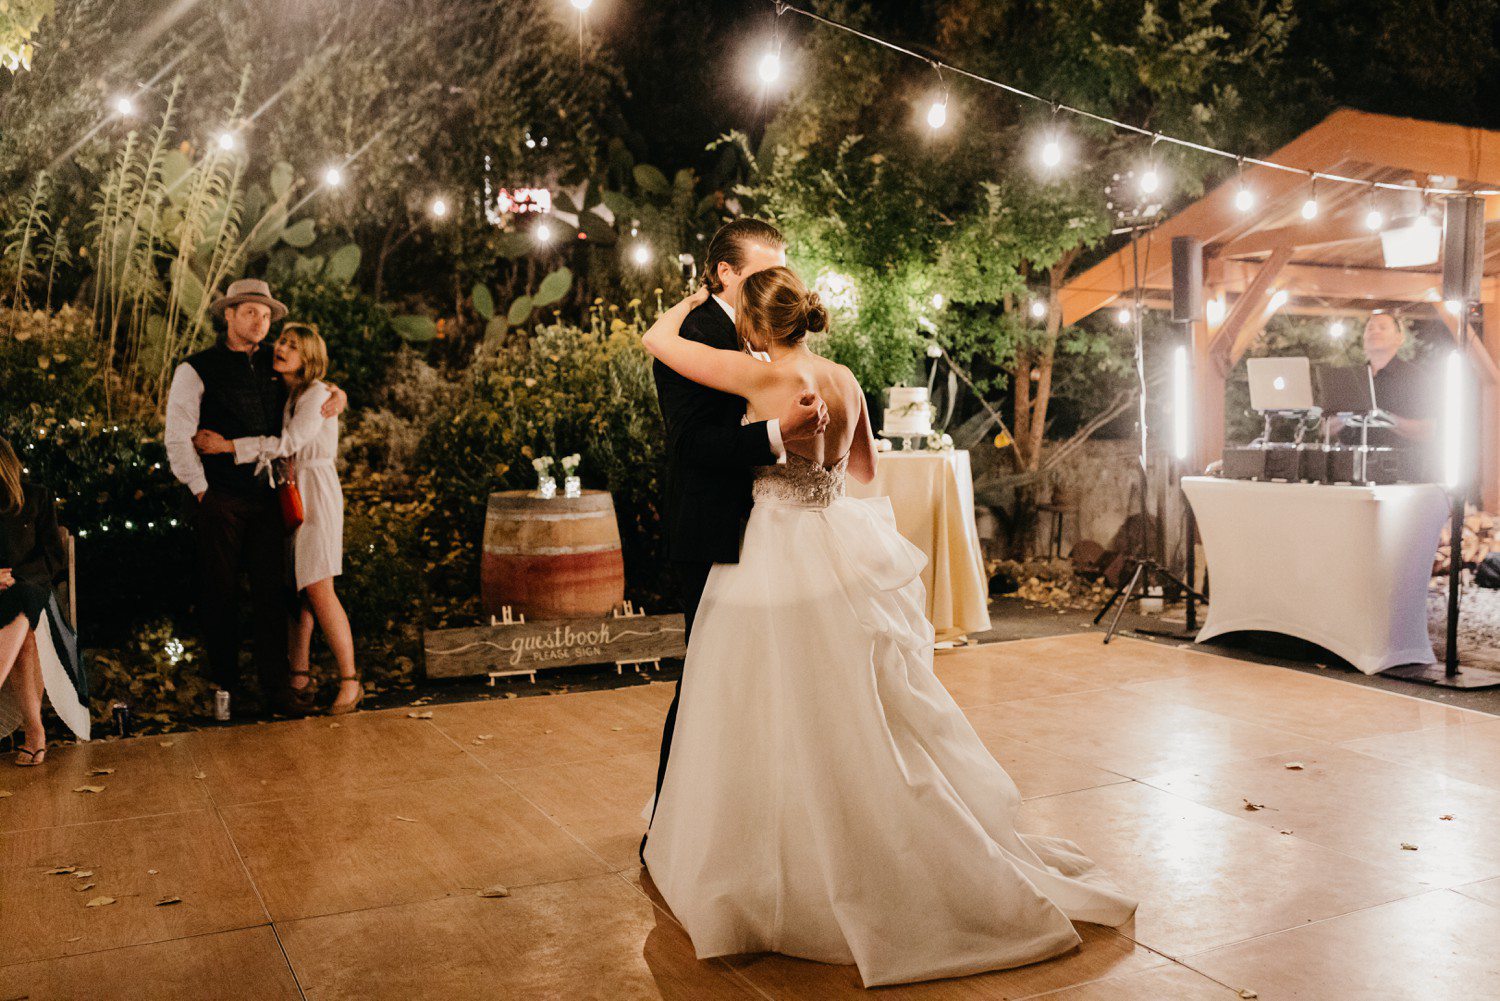 First Dance at Winery Wedding in California